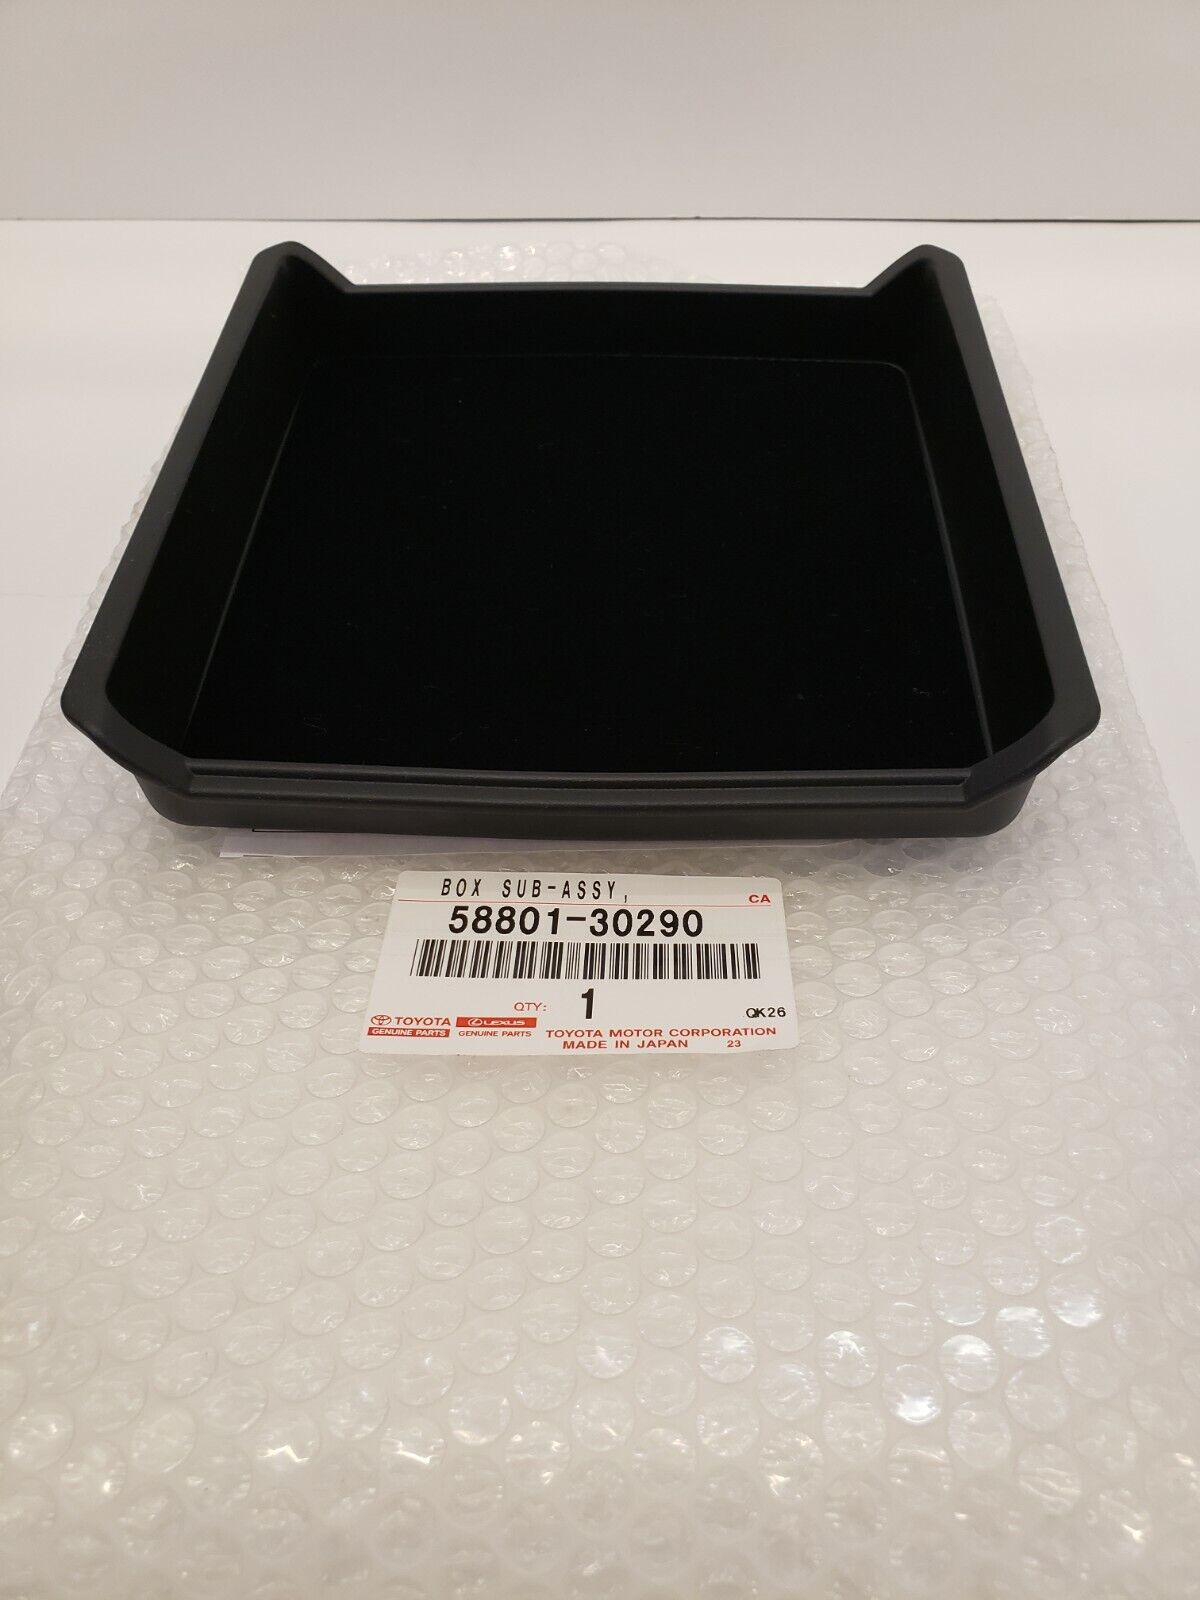 LEXUS OEM FACTORY NEW CENTER CONSOLE COIN TRAY BOX 2013-2020 GS350 / GSF / GS300